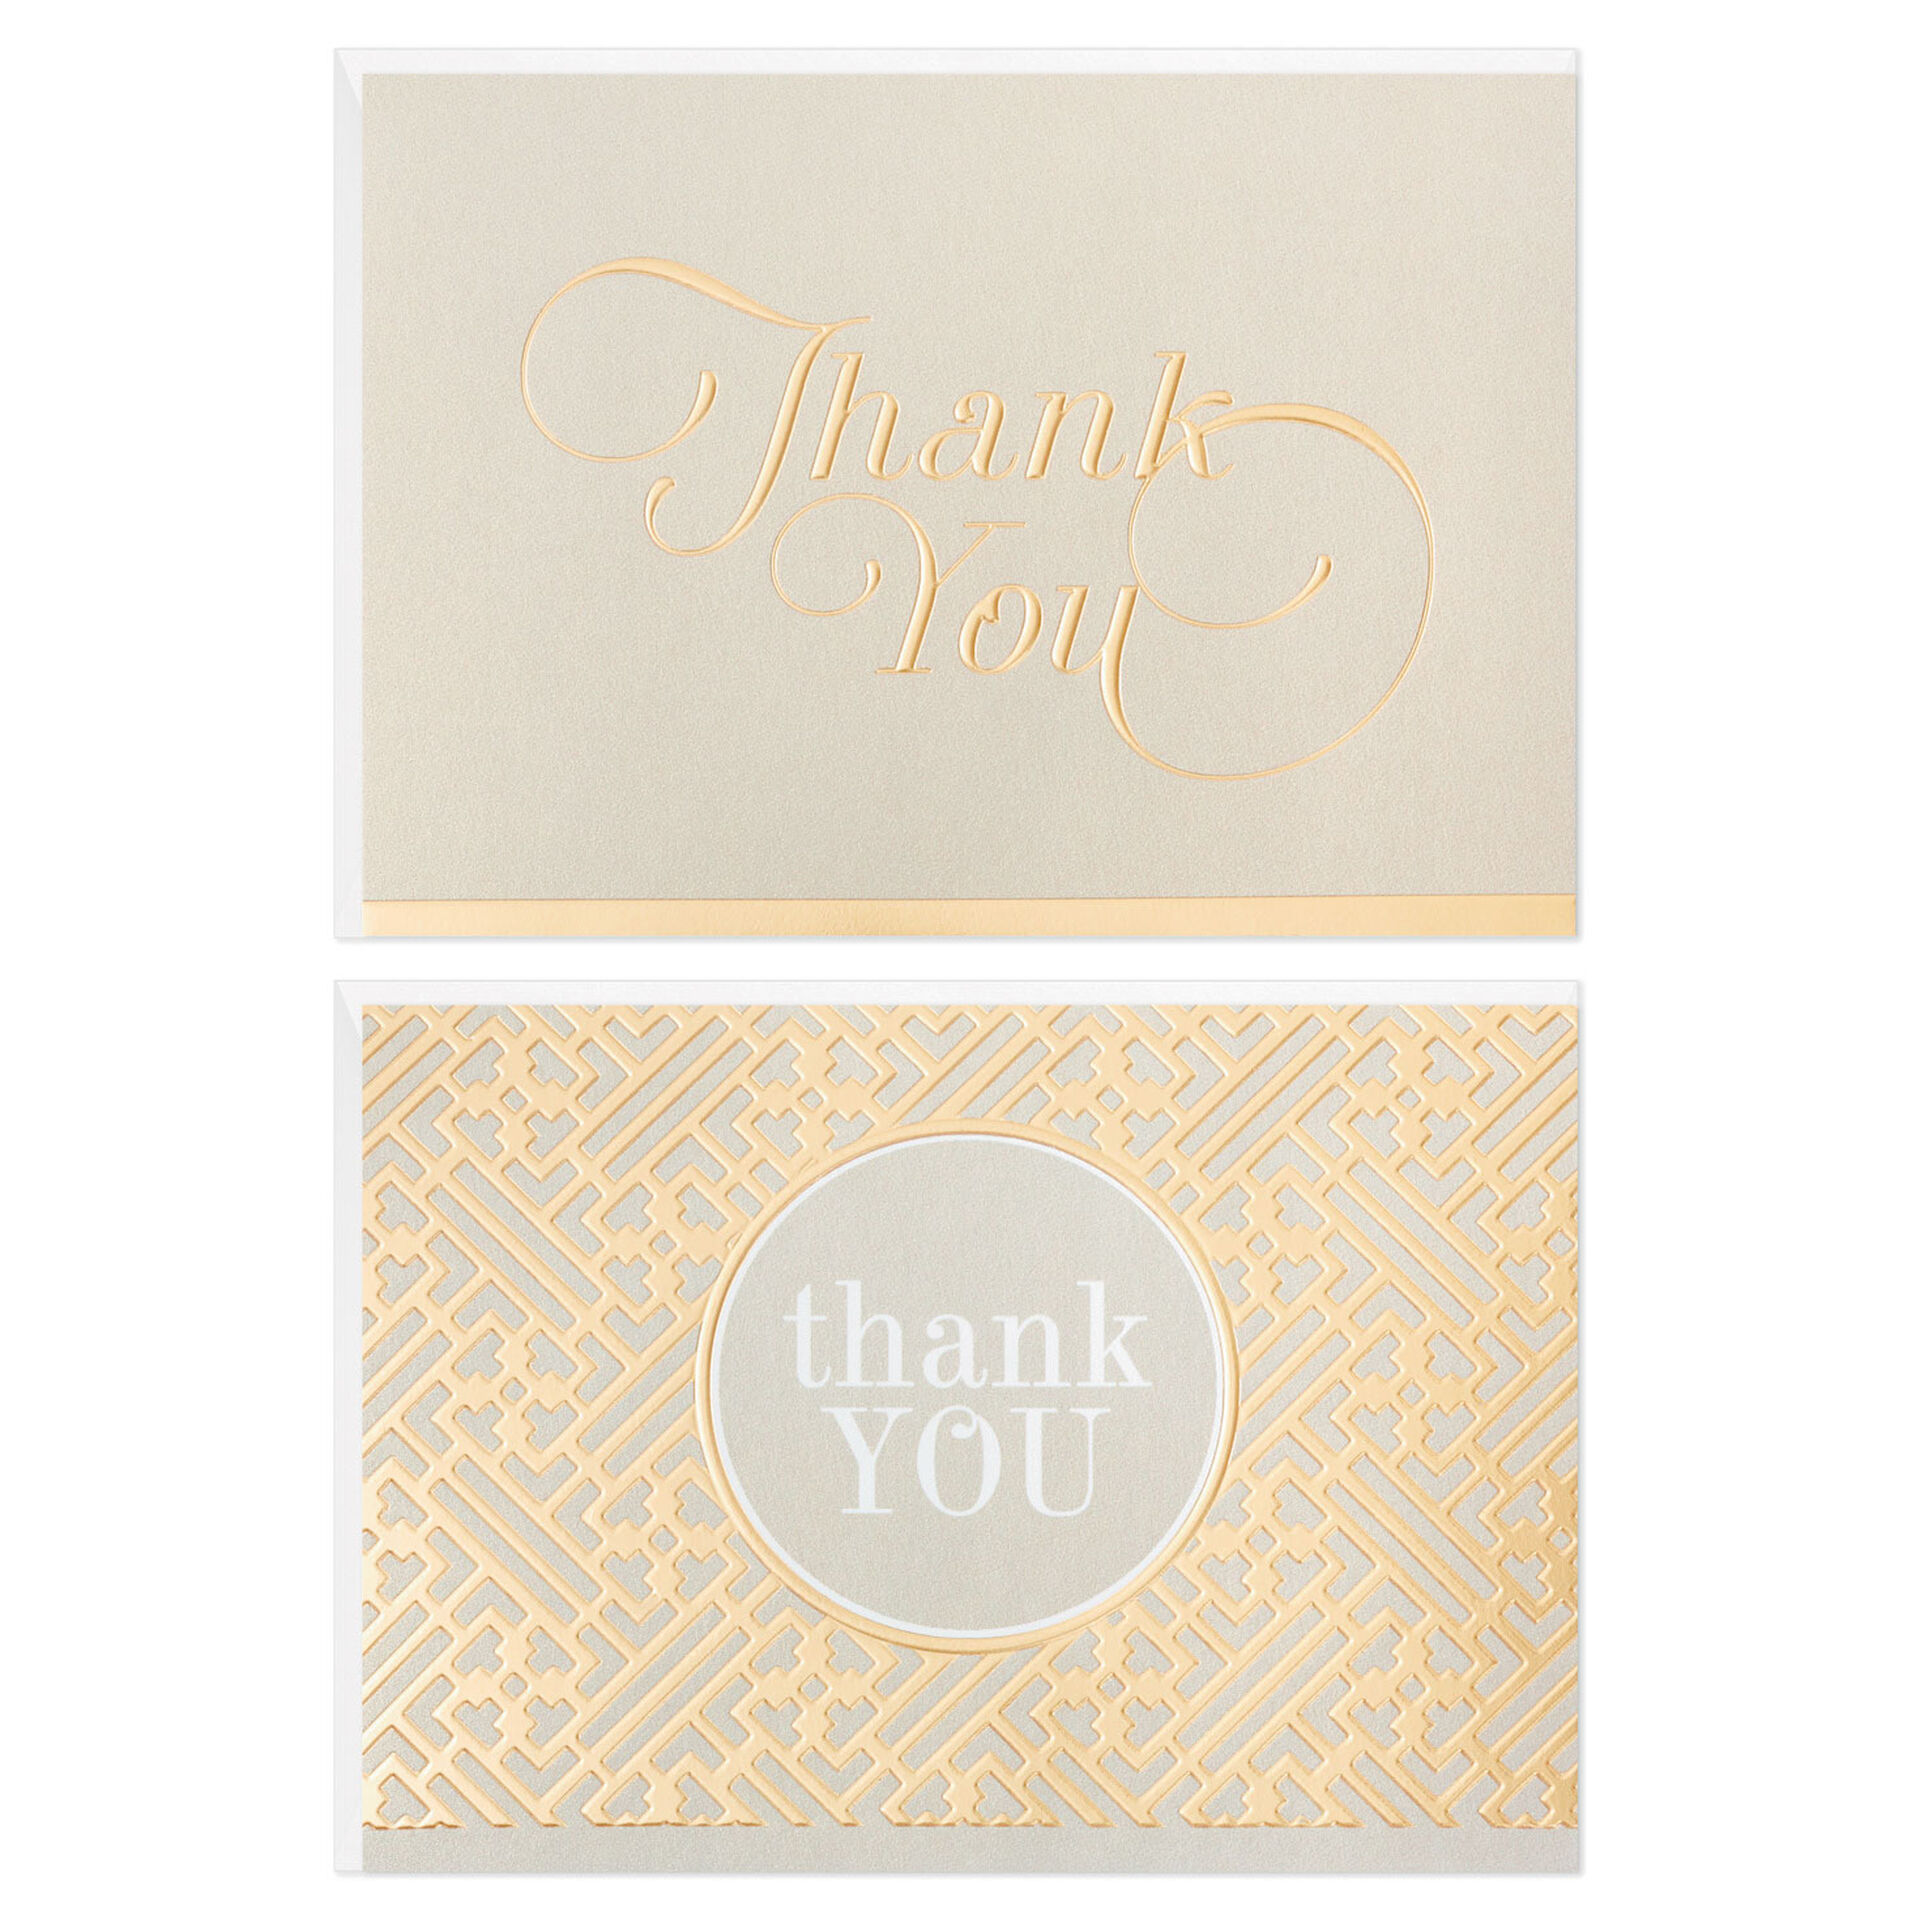 Gray-and-Gold-Bulk-Blank-ThankYou-Notes-Multipack_3THK2522_02